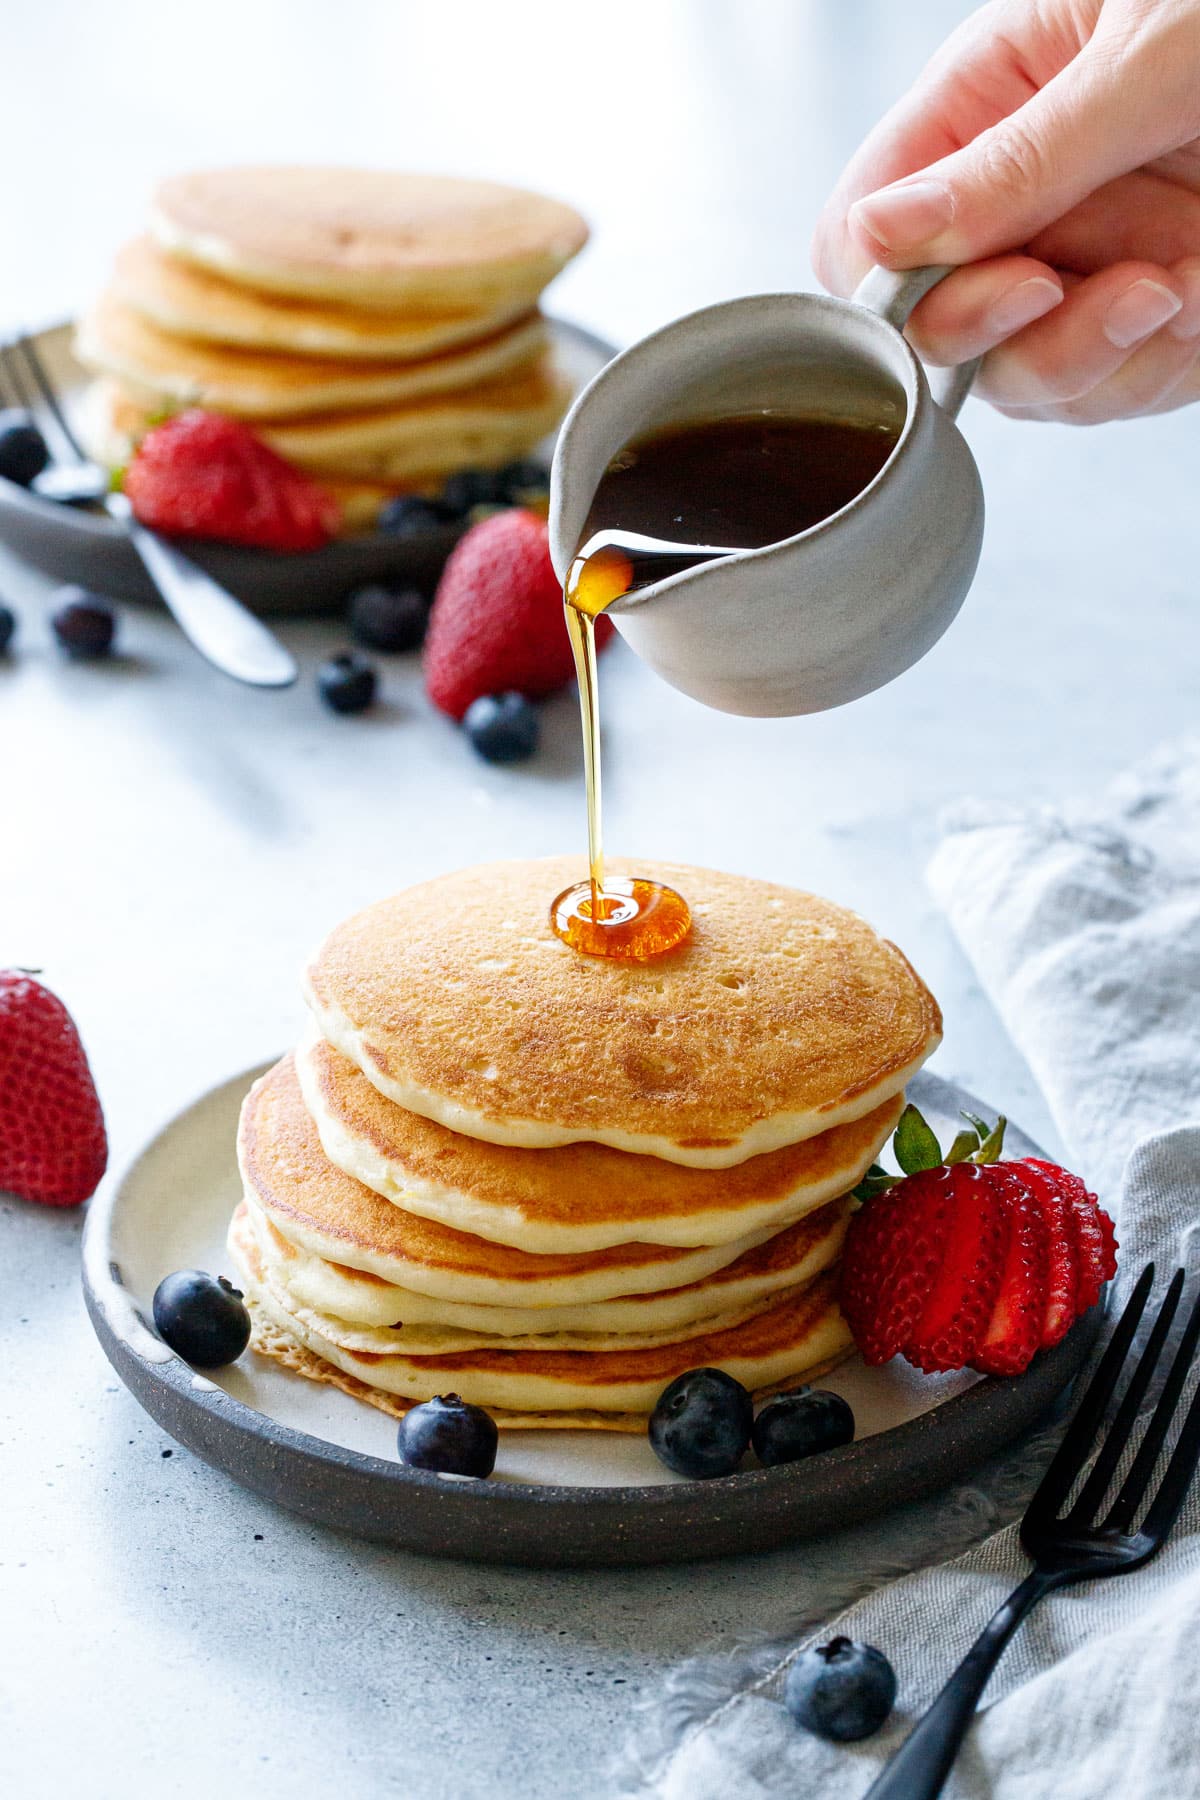 Pouring maple syrup on a tall stack of Olive Oil Pancakes, another plate in the background.